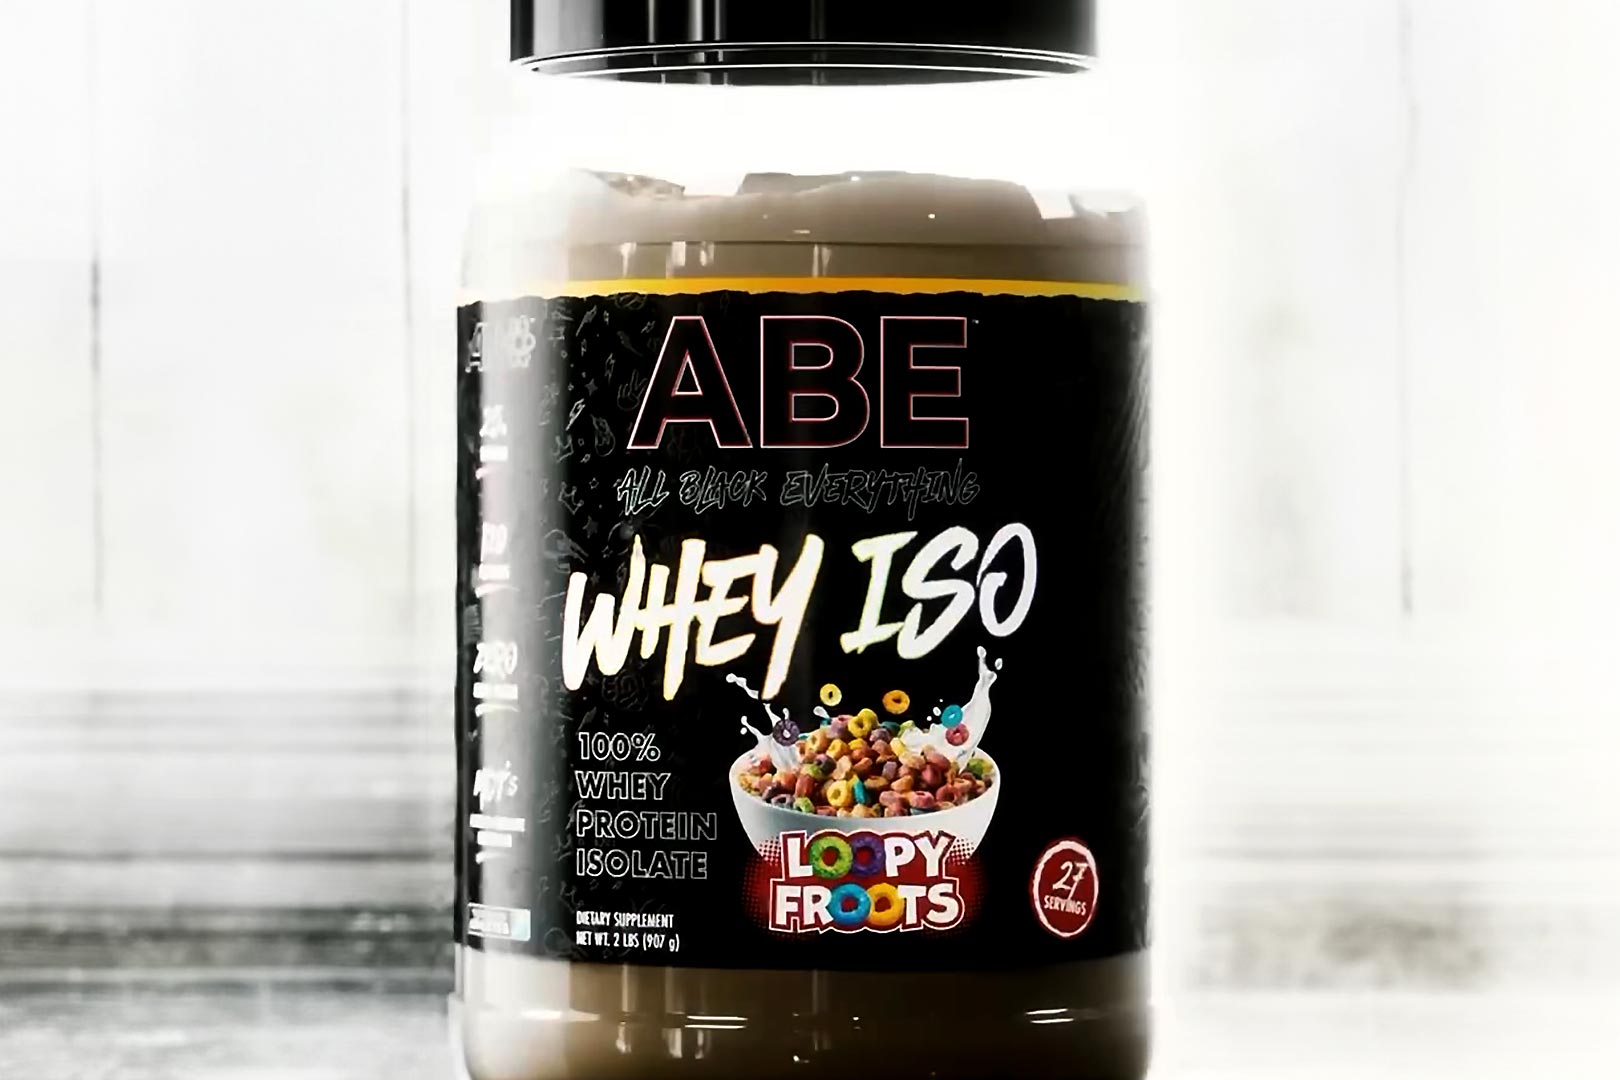 Applied Nutrition Shares More Info On Abe Whey Iso